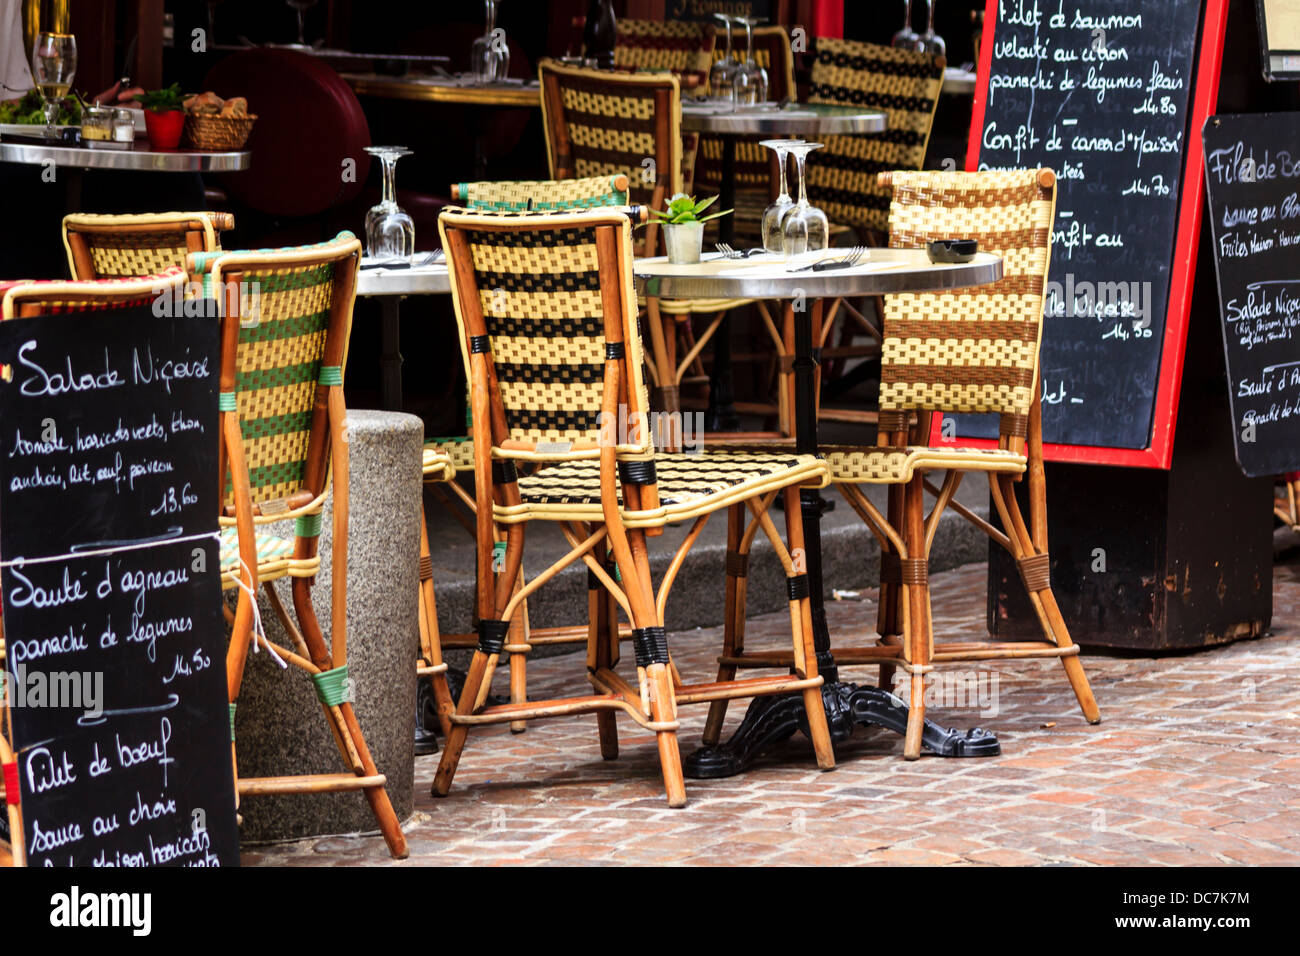 Cafe at rue Mouffetard in Paris, France / wicker chairs, paved street and menu boards Stock Photo